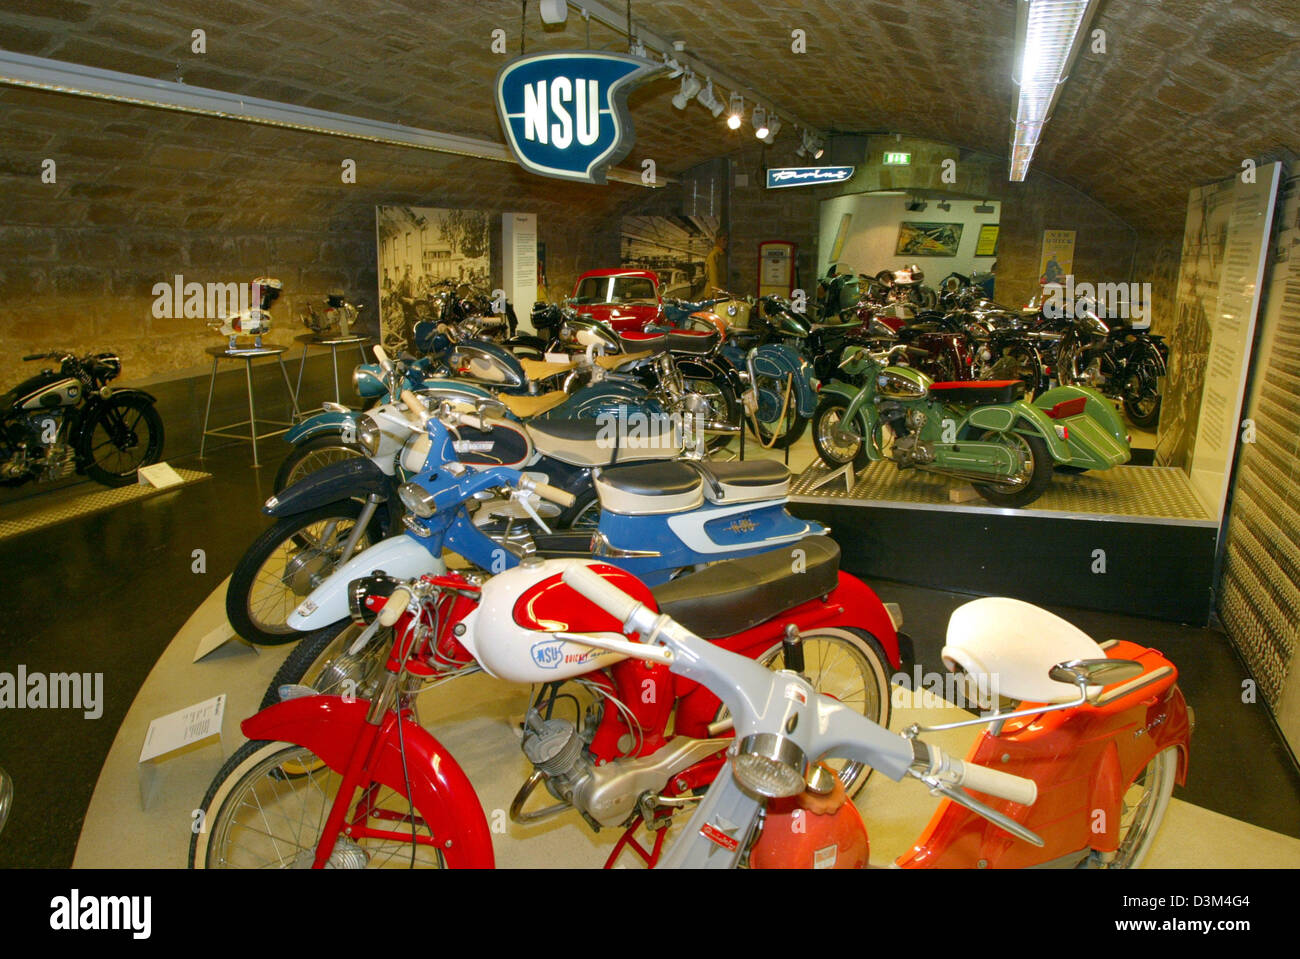 (dpa) - Various motorised vehicles and motorcycles made by NSU are being exhibited at the 'Zweirad Museum', museum for two-wheelers, in Neckarsulm, Germany, 07 November 2005. According to the management, the museum, which was opened in 1956, accommodates the largest historic collection of two-wheelers in Germany with around 400 exhibits. Photo: Harry Melchert Stock Photo